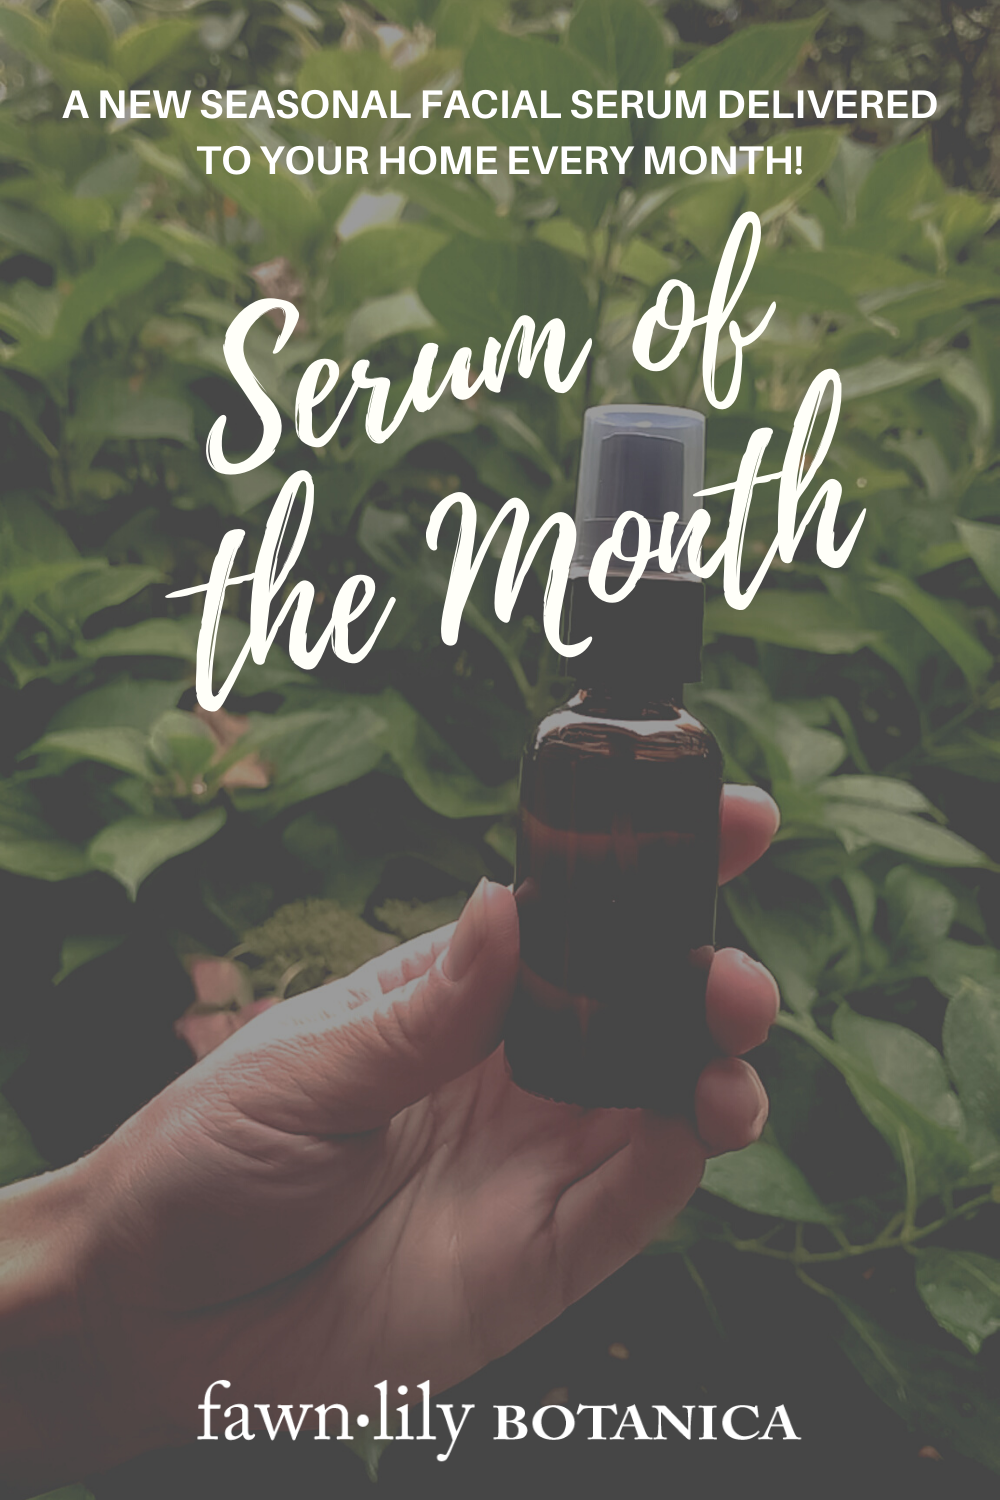 BOTANICAL SERUM OF THE MONTH | Fawn Lily Botanica - Monthly exclusive botanical facial serum specially formulated to correspond with the seasons.